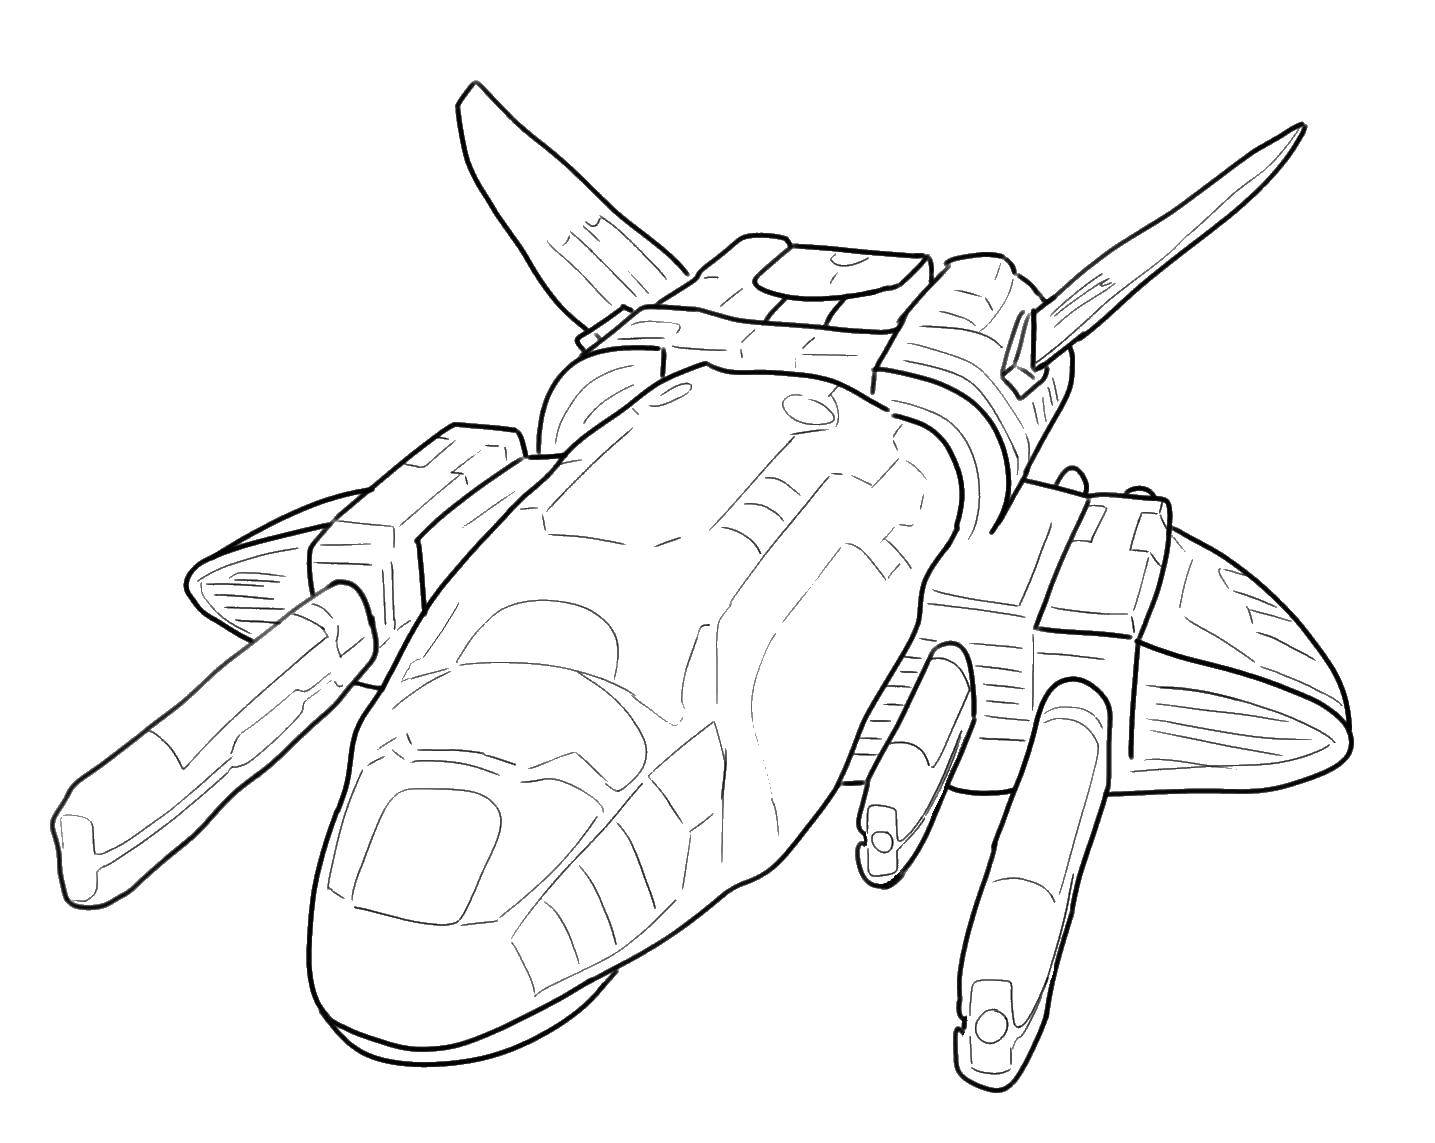 Coloring Space Shuttle. Category spaceships. Tags:  space ship , Shuttle, space.